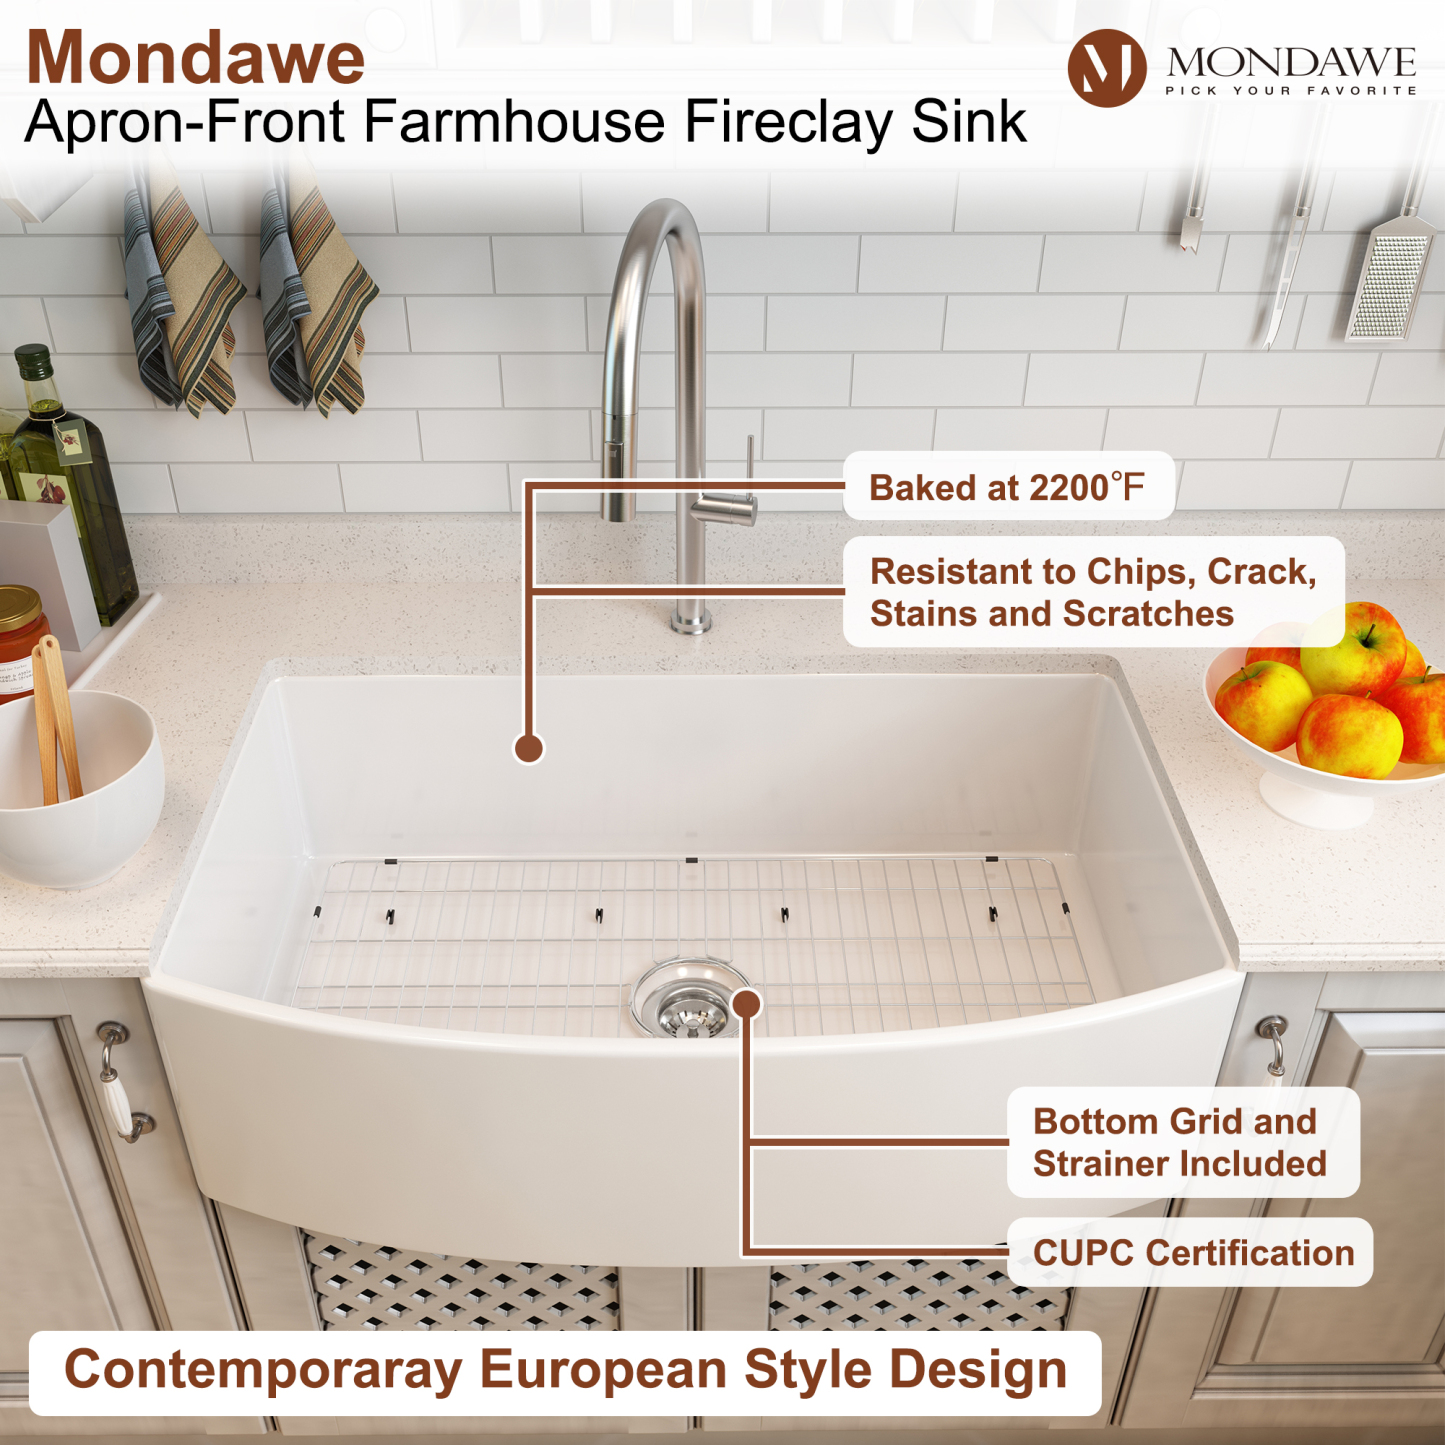 Farmhouse 33 in. single bowl fireclay kitchen sink in white comes with pull-down faucet-Mondawe